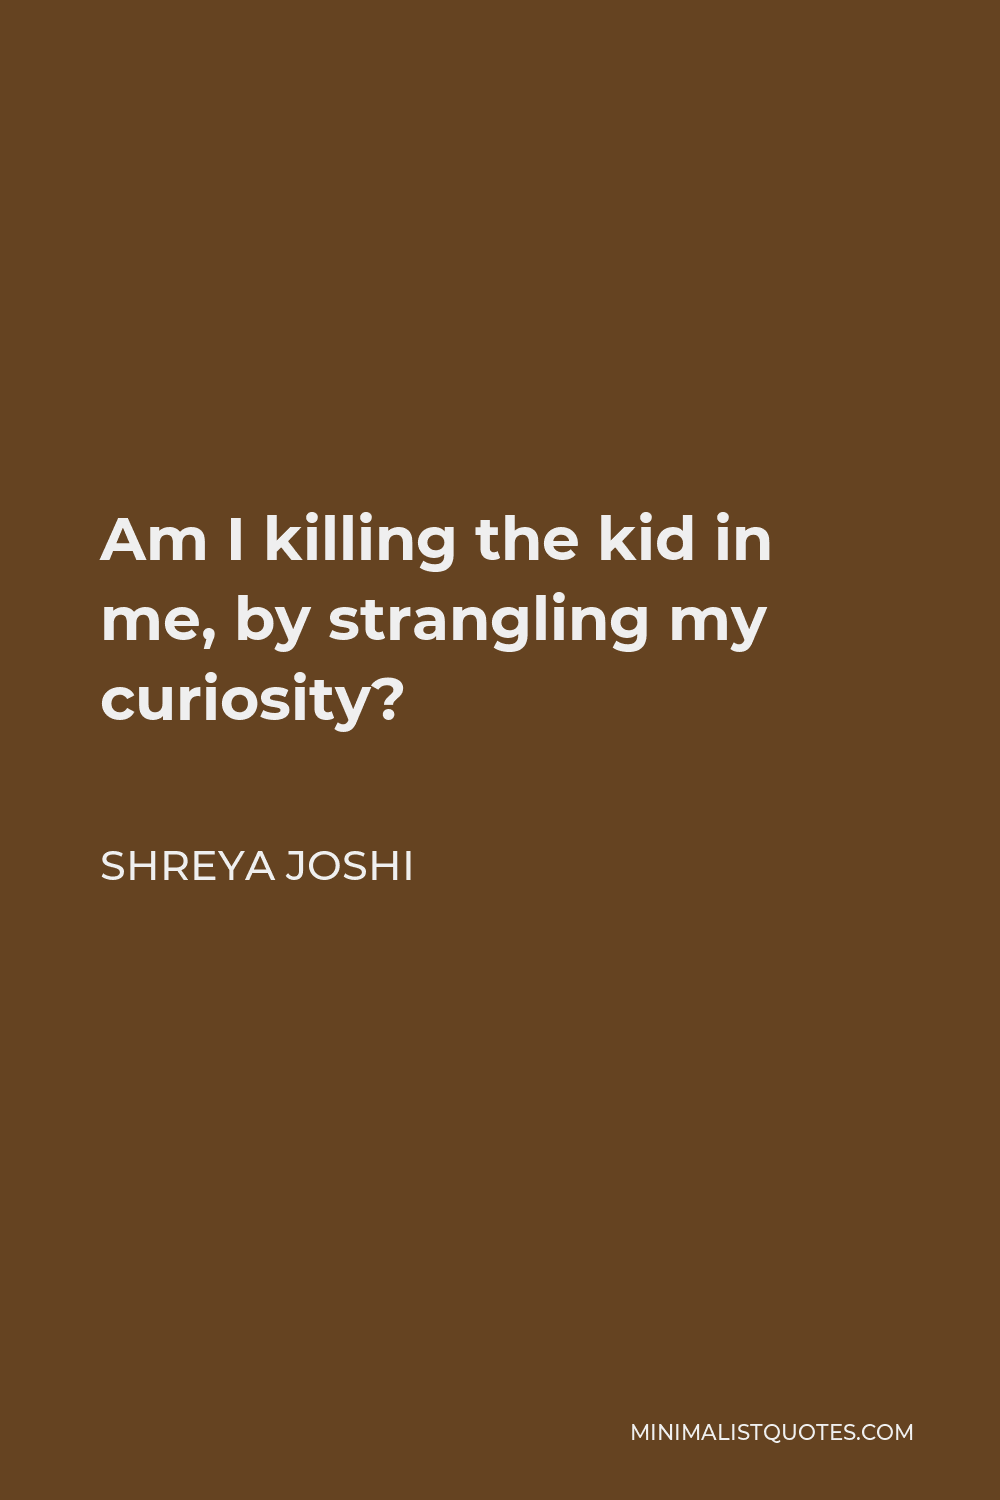 Shreya Joshi Quote - Am I killing the kid in me, by strangling my curiosity?